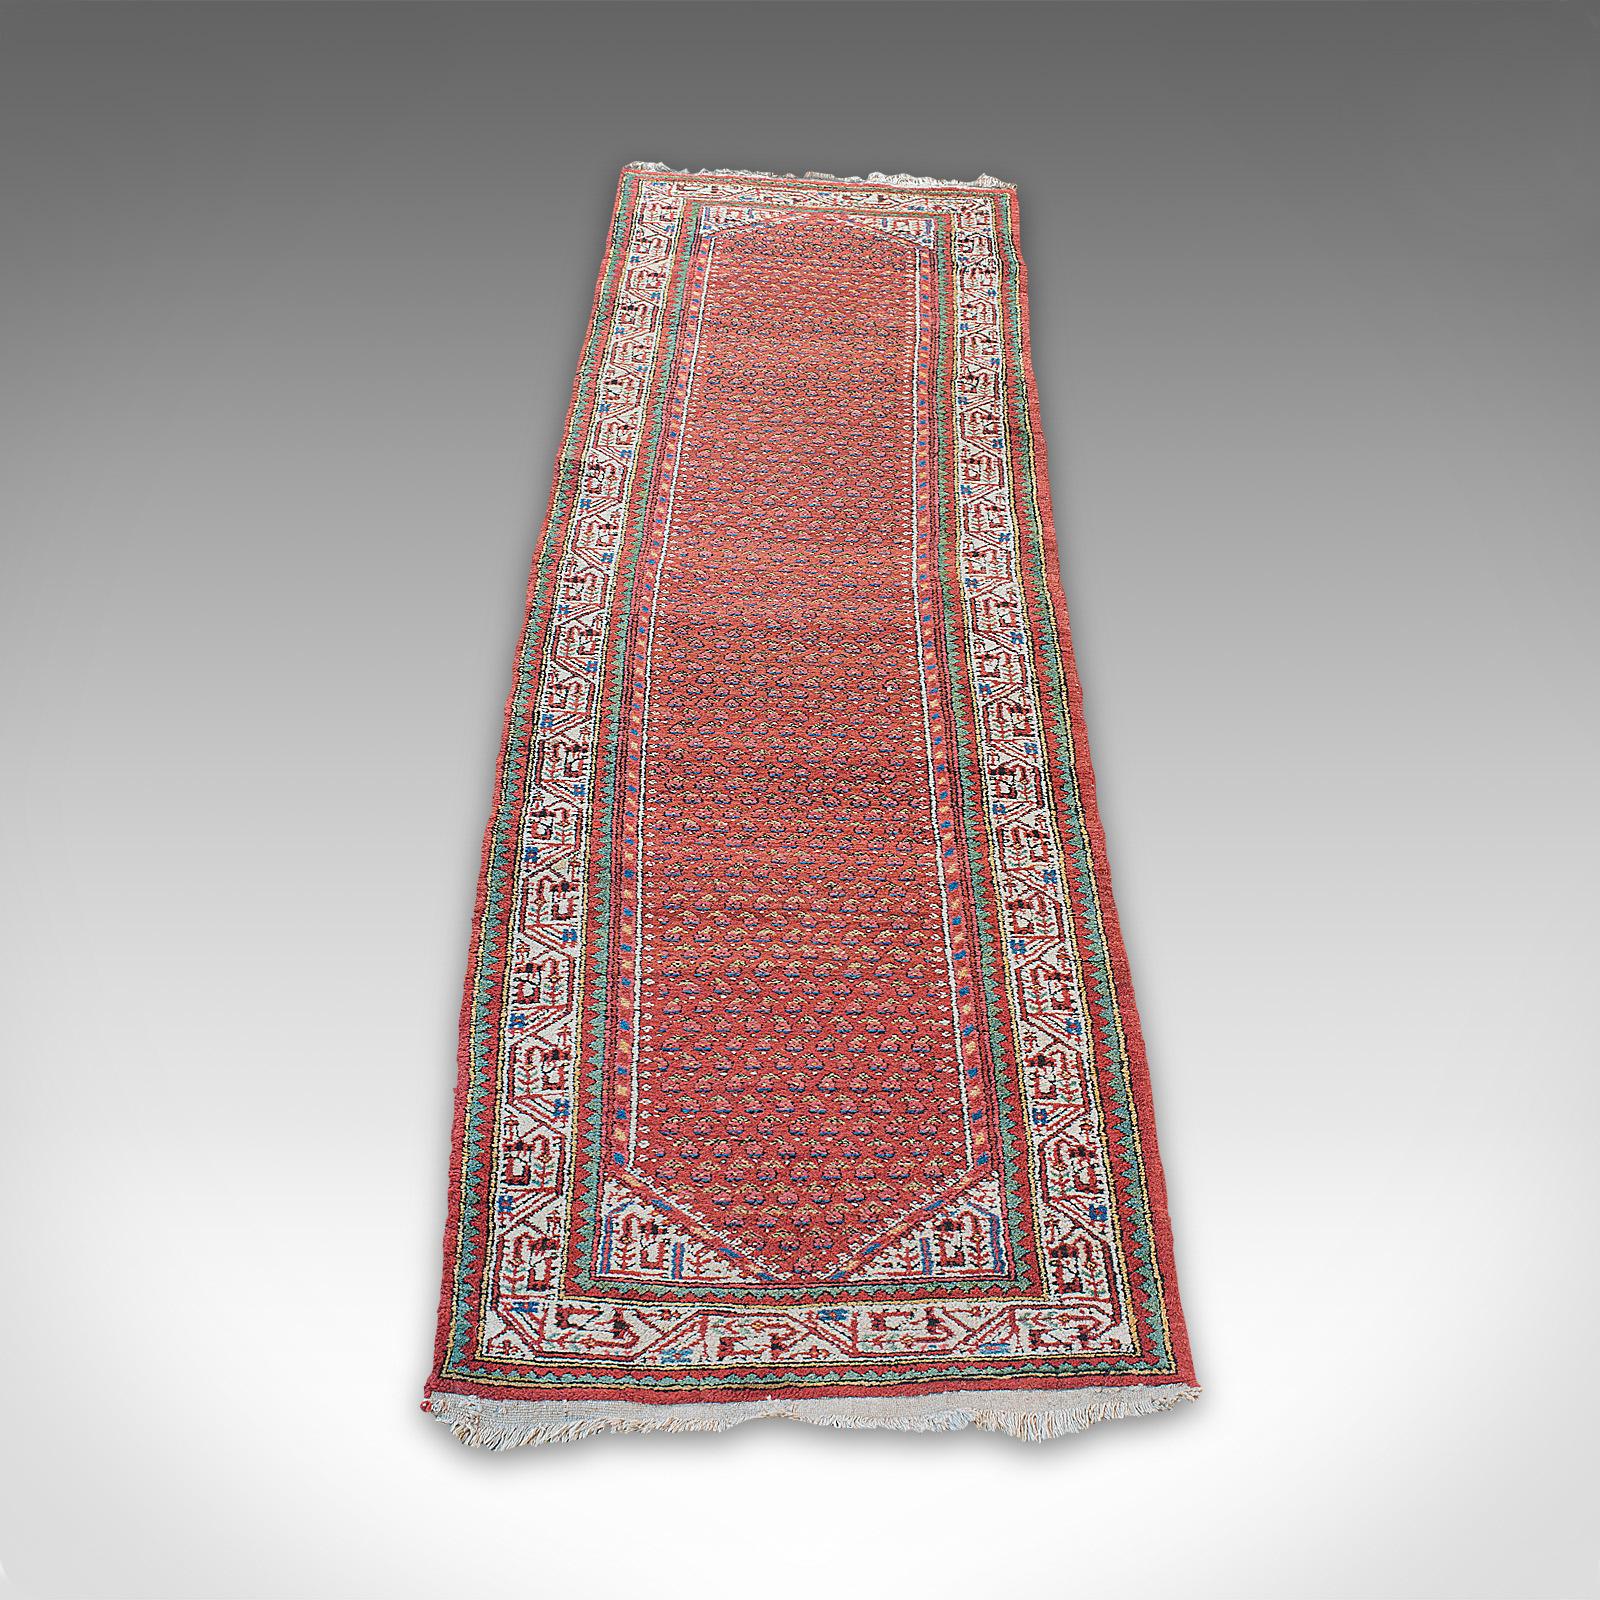 This is a long, vintage hallway runner. A Persian, woolen hall carpet, dating to the mid 20th century, circa 1960.

Generously sized runner at 83cm x 310cm (2.72' x 10.17')
Add a warm texture and great colour to the hallway
Displaying a